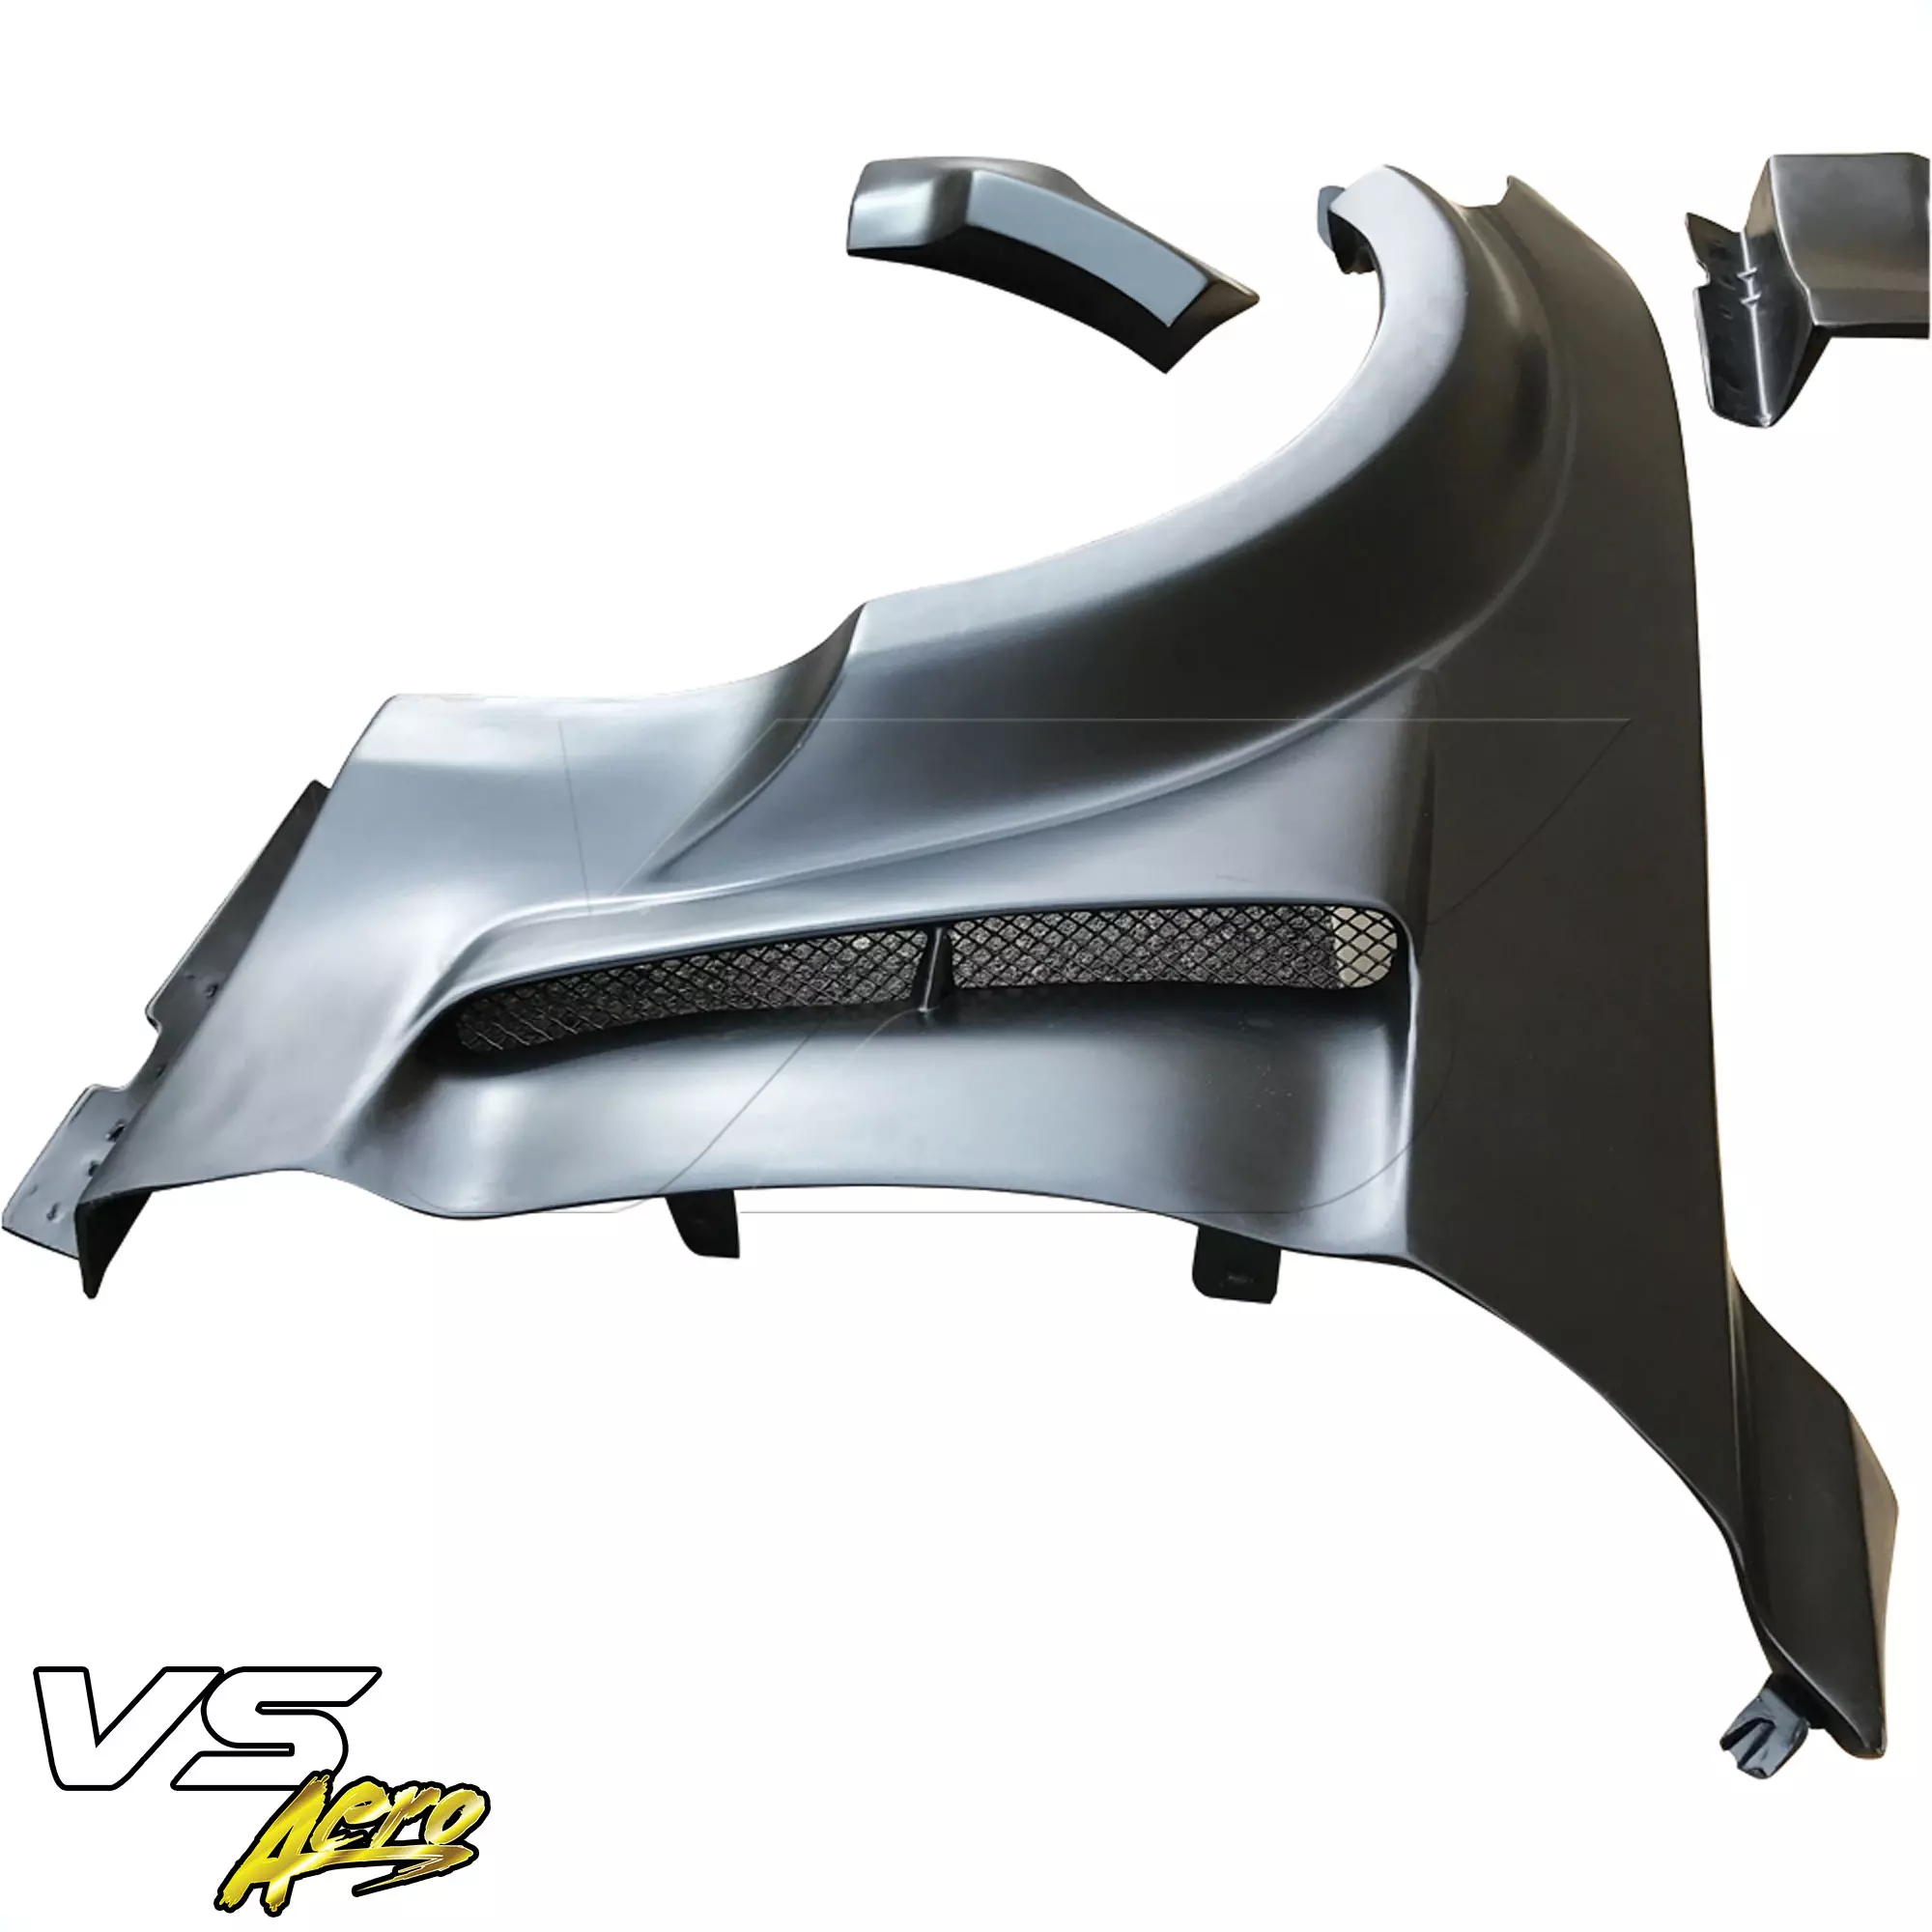 VSaero FRP KTOT Wide Body Fenders (front) > Ford Mustang 2015-2020 - Image 20